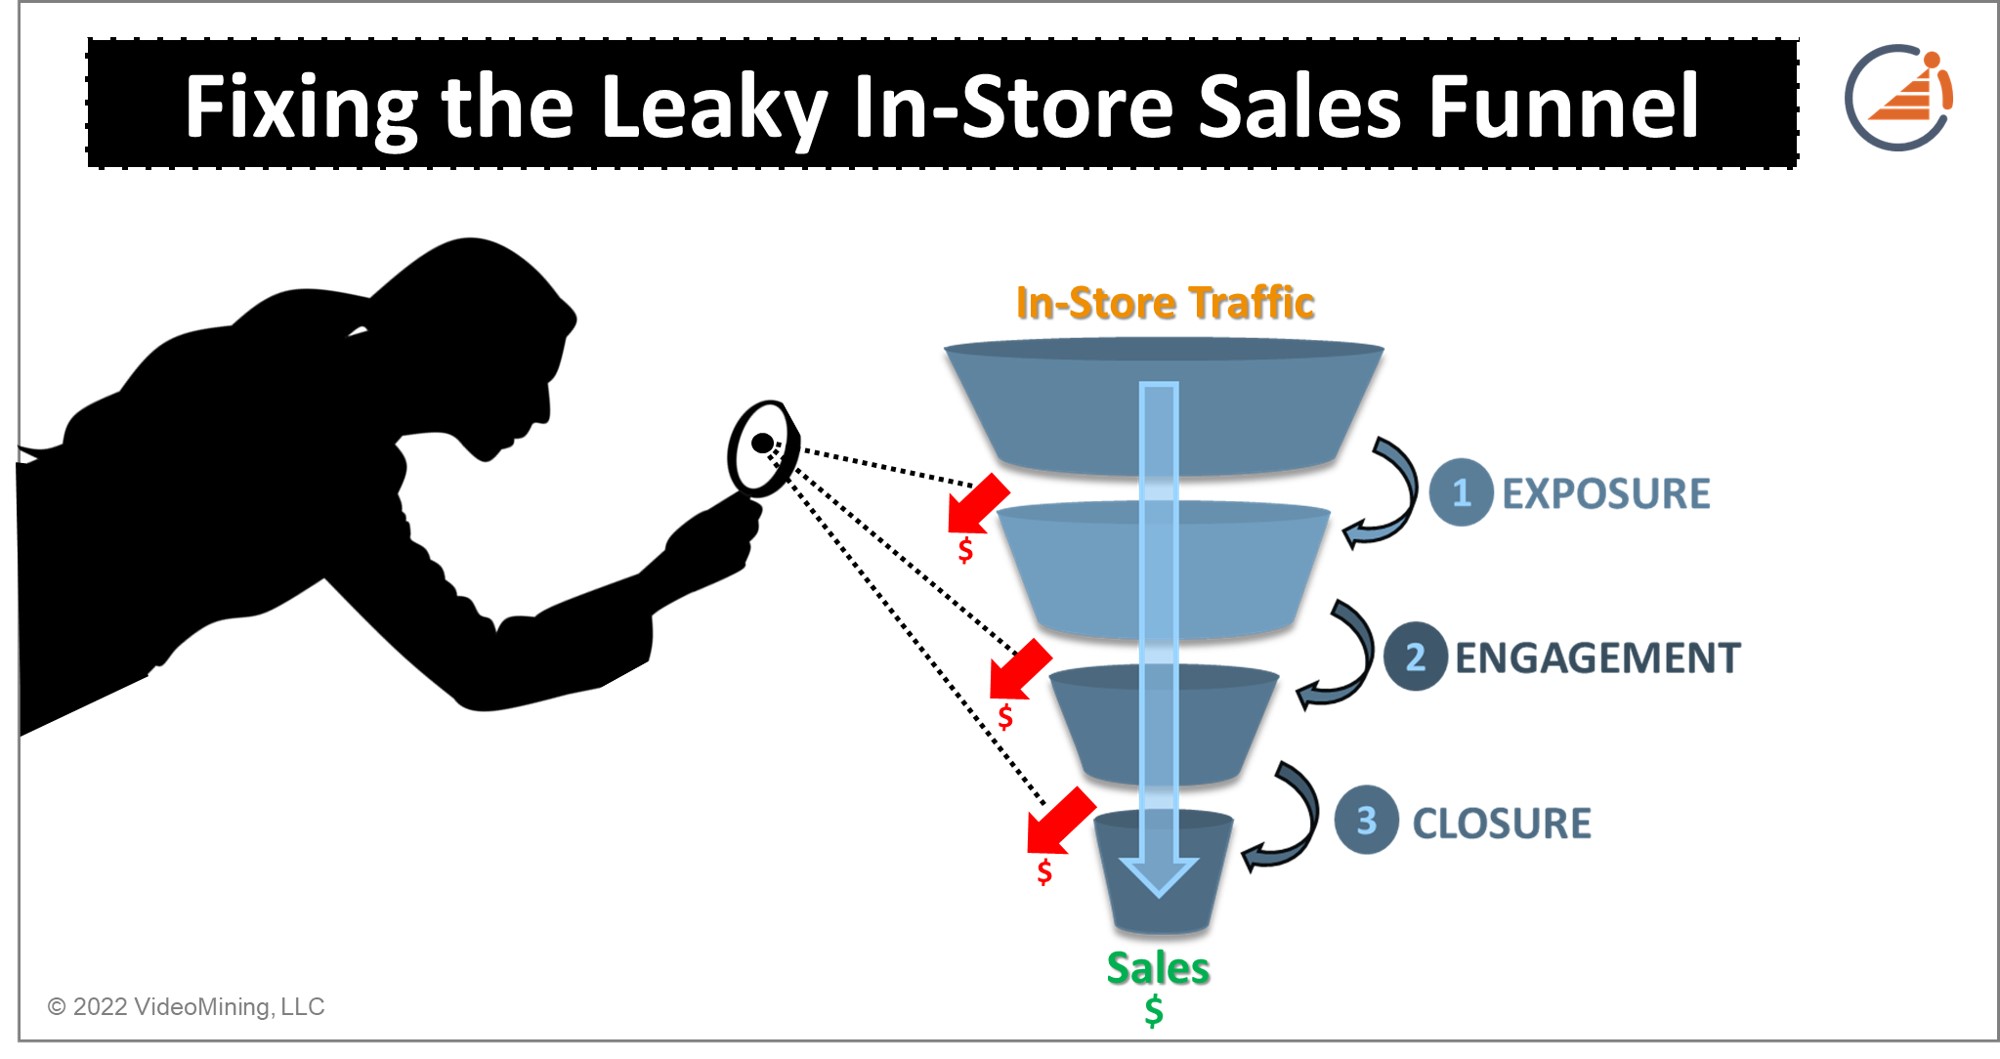 Fixing the leaky in-store sales funnel: Optimizing Exposure, Engagement & Closure Rates 